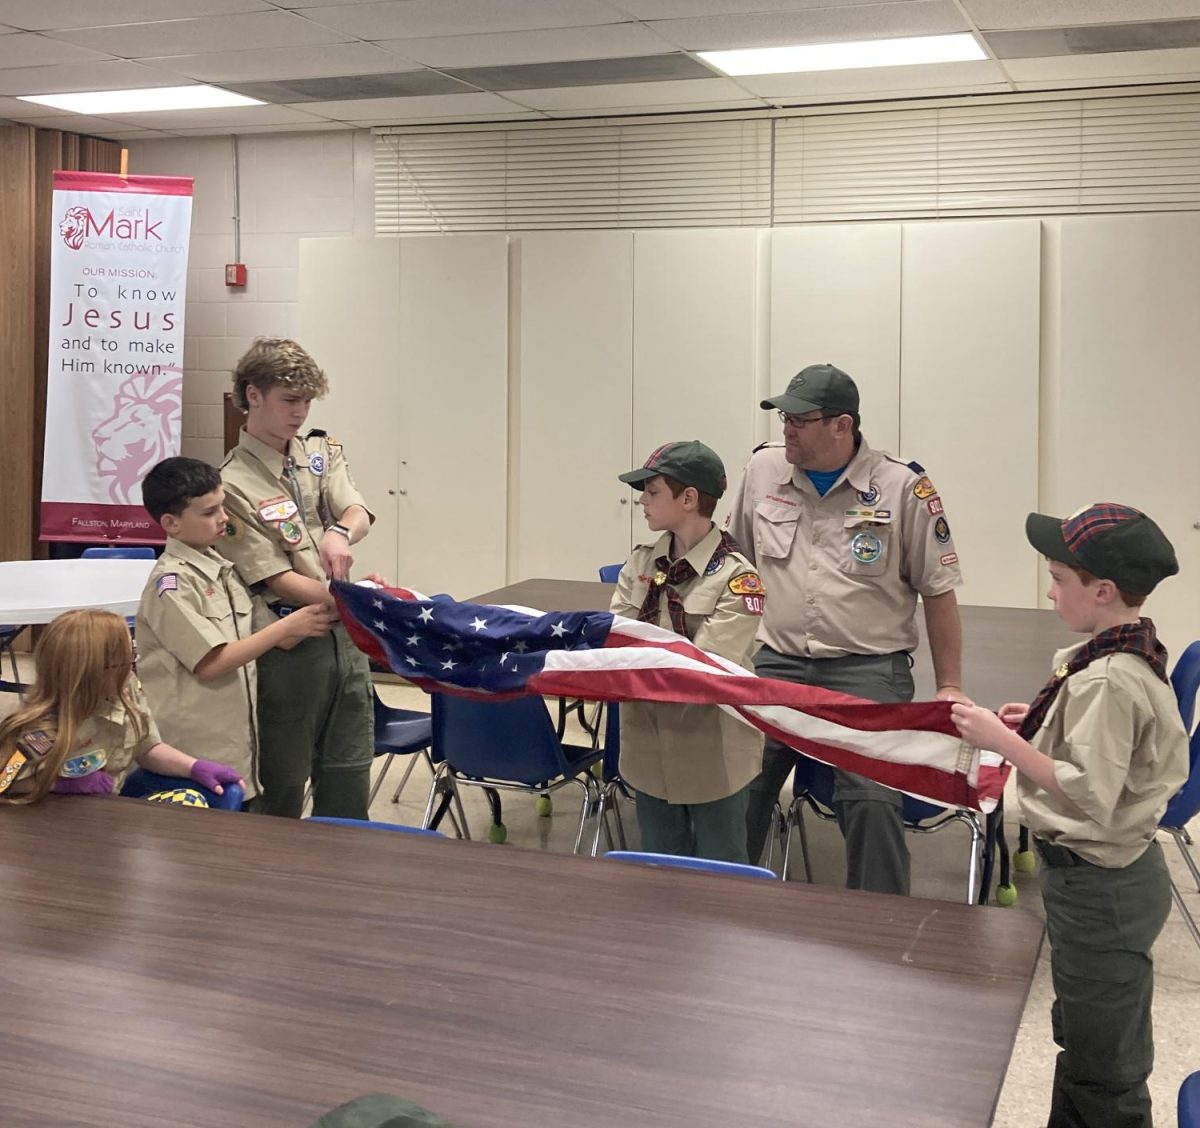 Nate+showing+future+eagle+scouts+how+to+fold+the+American+flag.+%28Photo+Courtesy+of+Ms.+Grant%29